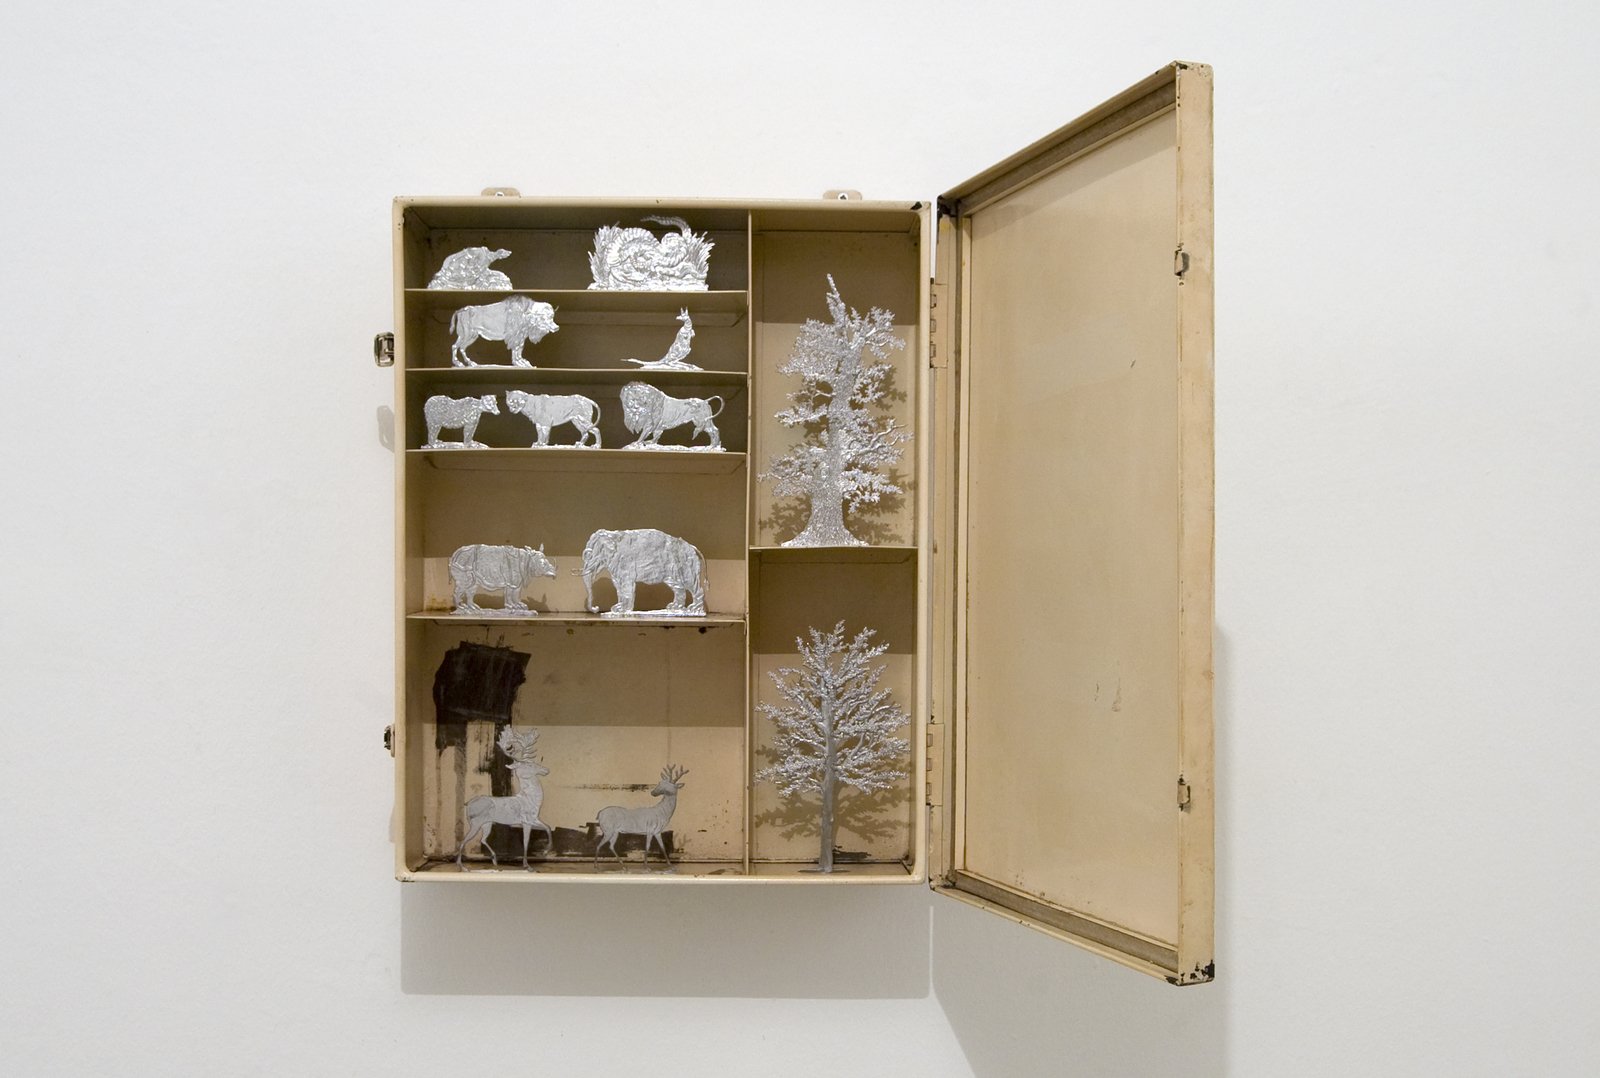 Mark Dion, Natural History, 2012, Mixed media (cabinet, objects), 48,5 x 50 x 46 cm, Courtesy Georg Kargl Fine Arts Vienna.